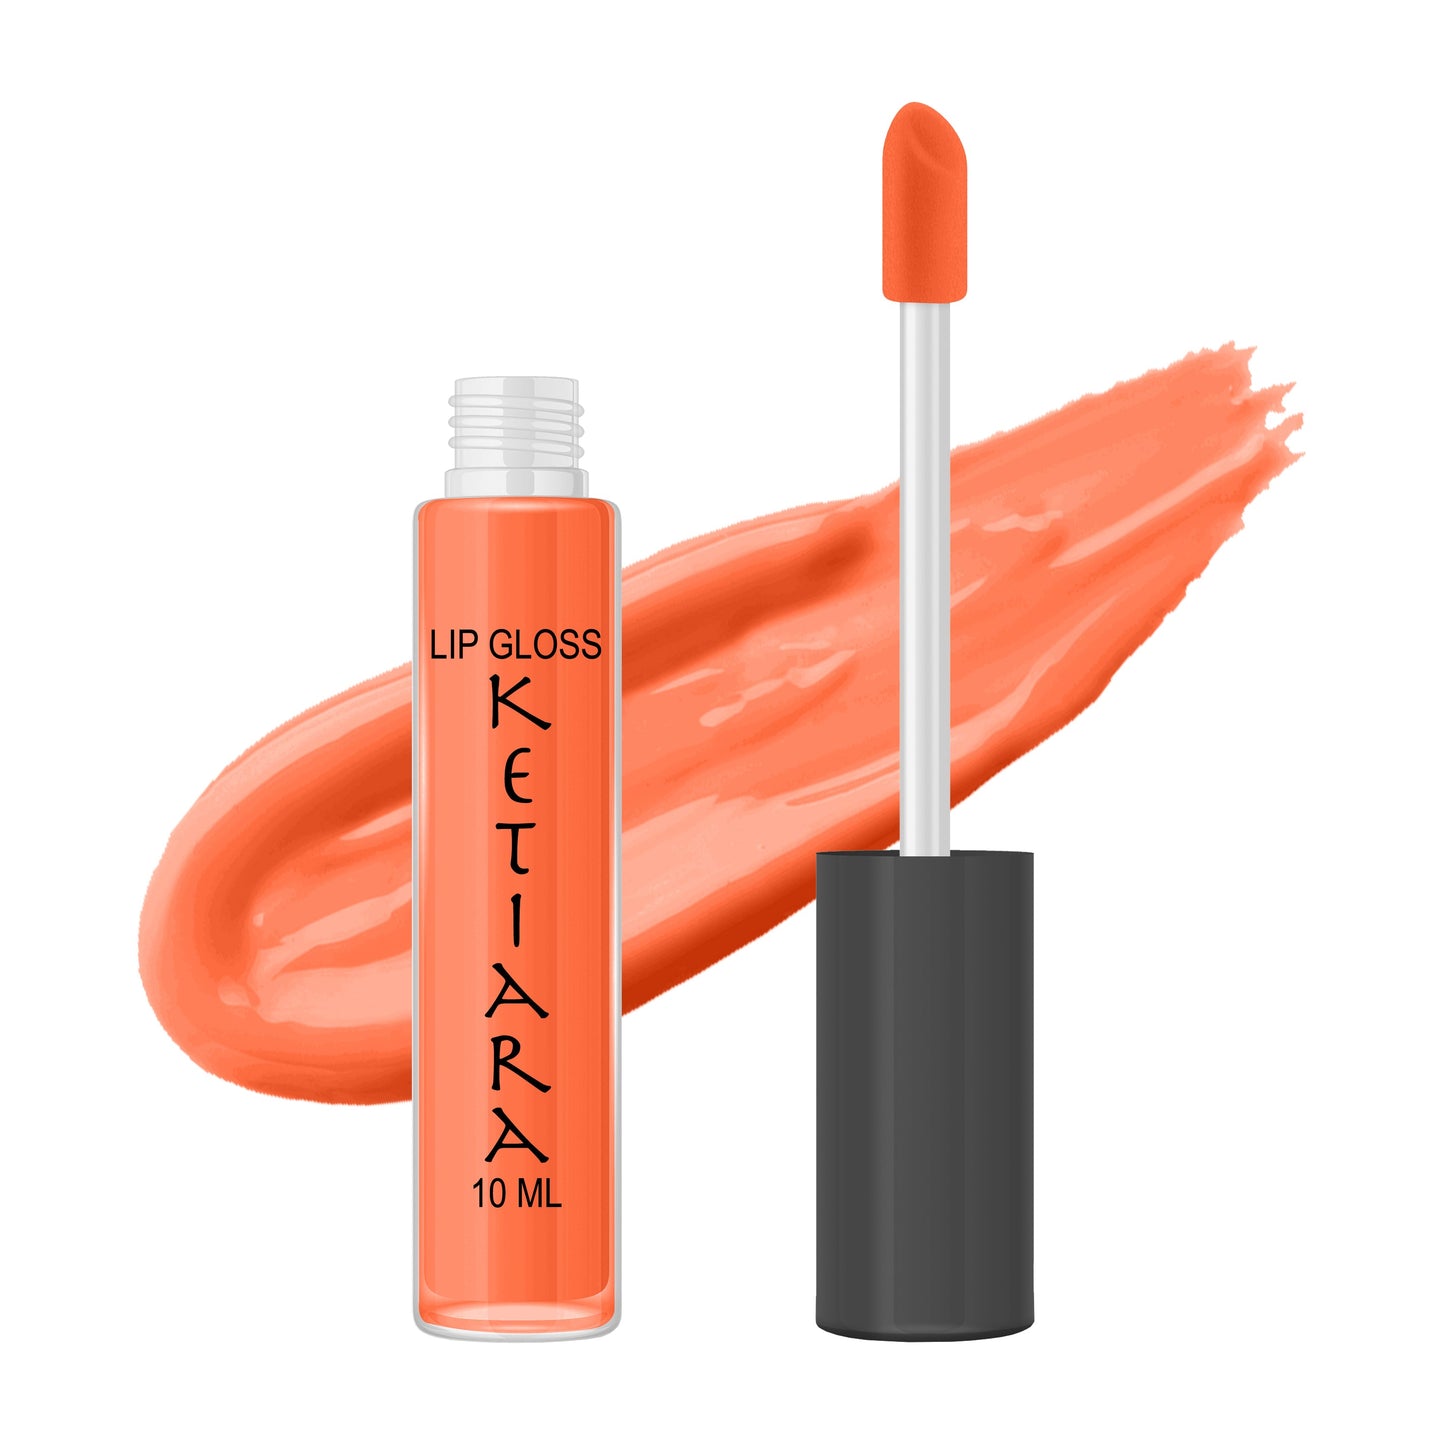 Portland Orange Hydrating And Moisturizing Non-sticky Premium Mild Tinting Lip Gloss Infused With Hyaluronic Acid